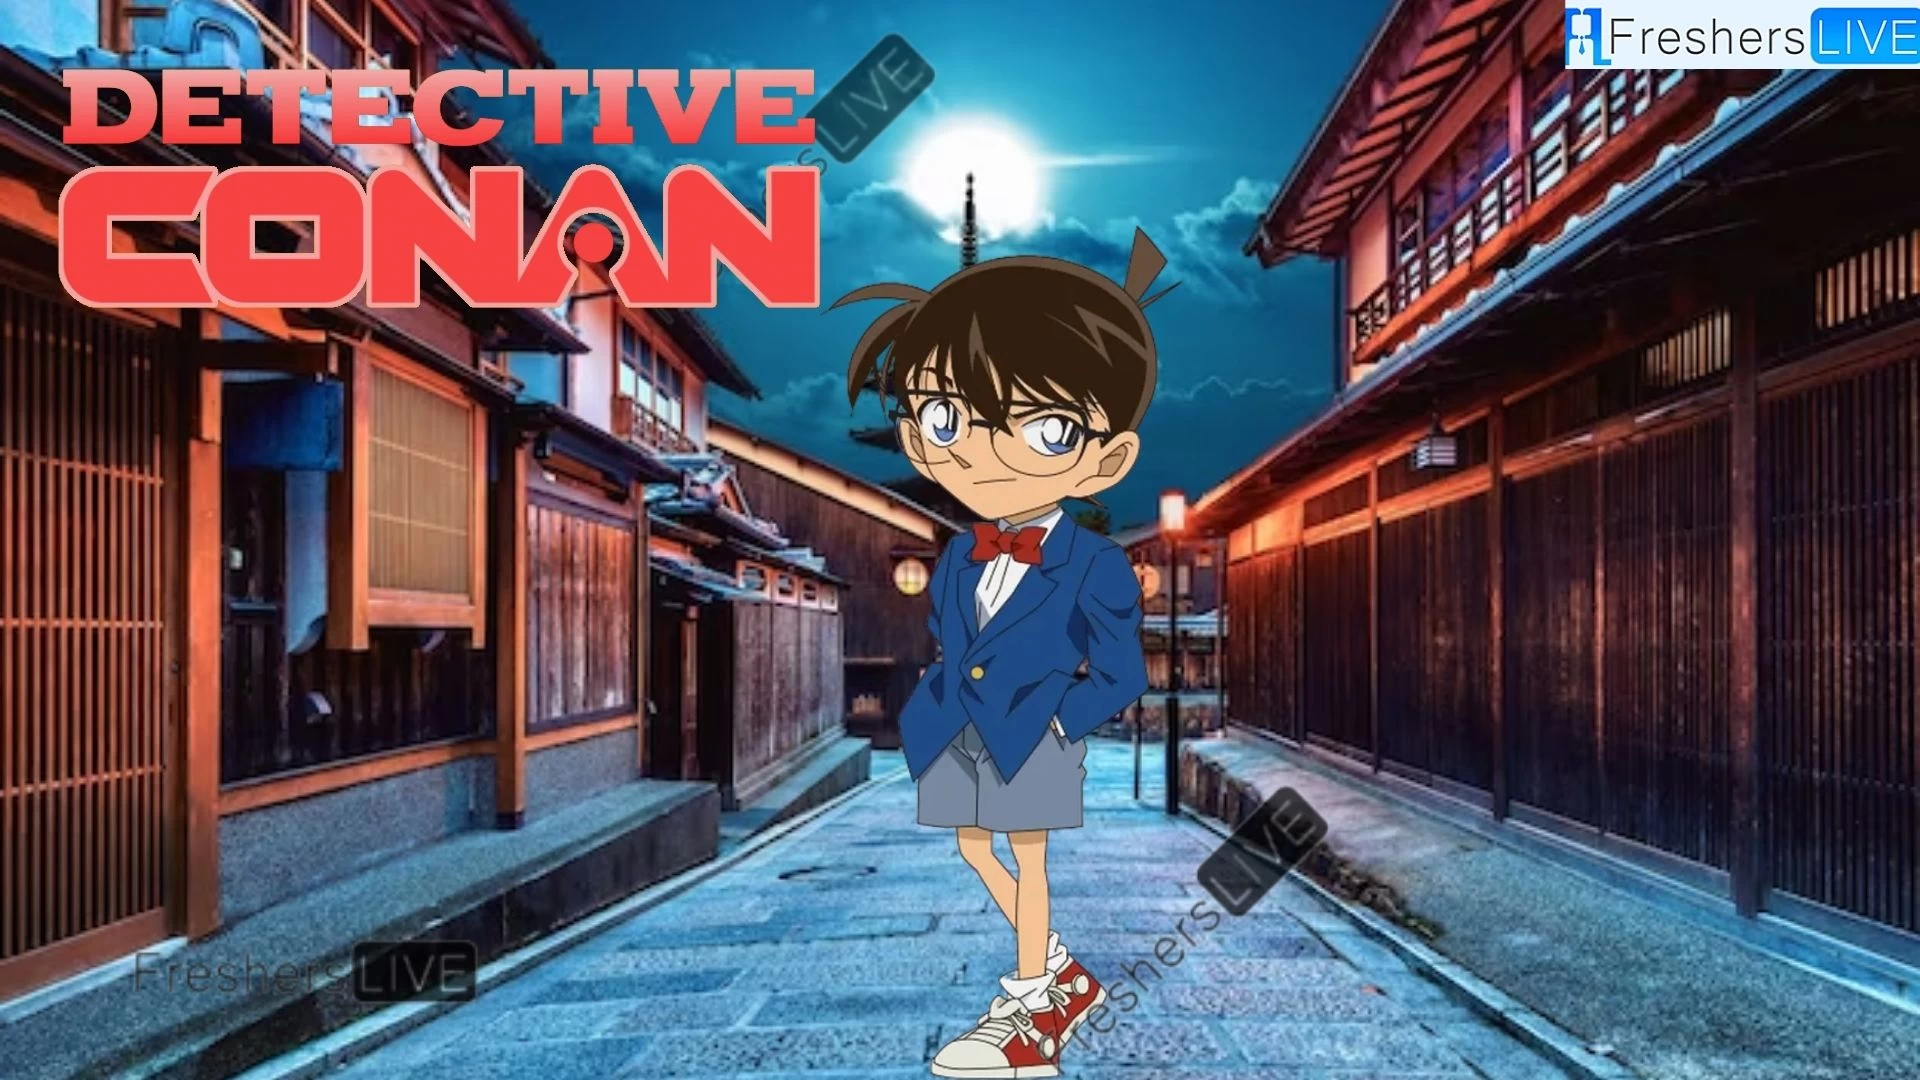 Detective Conan Chapter 1121 Spoilers, Raw Scan, Release Date, Countdown, and More